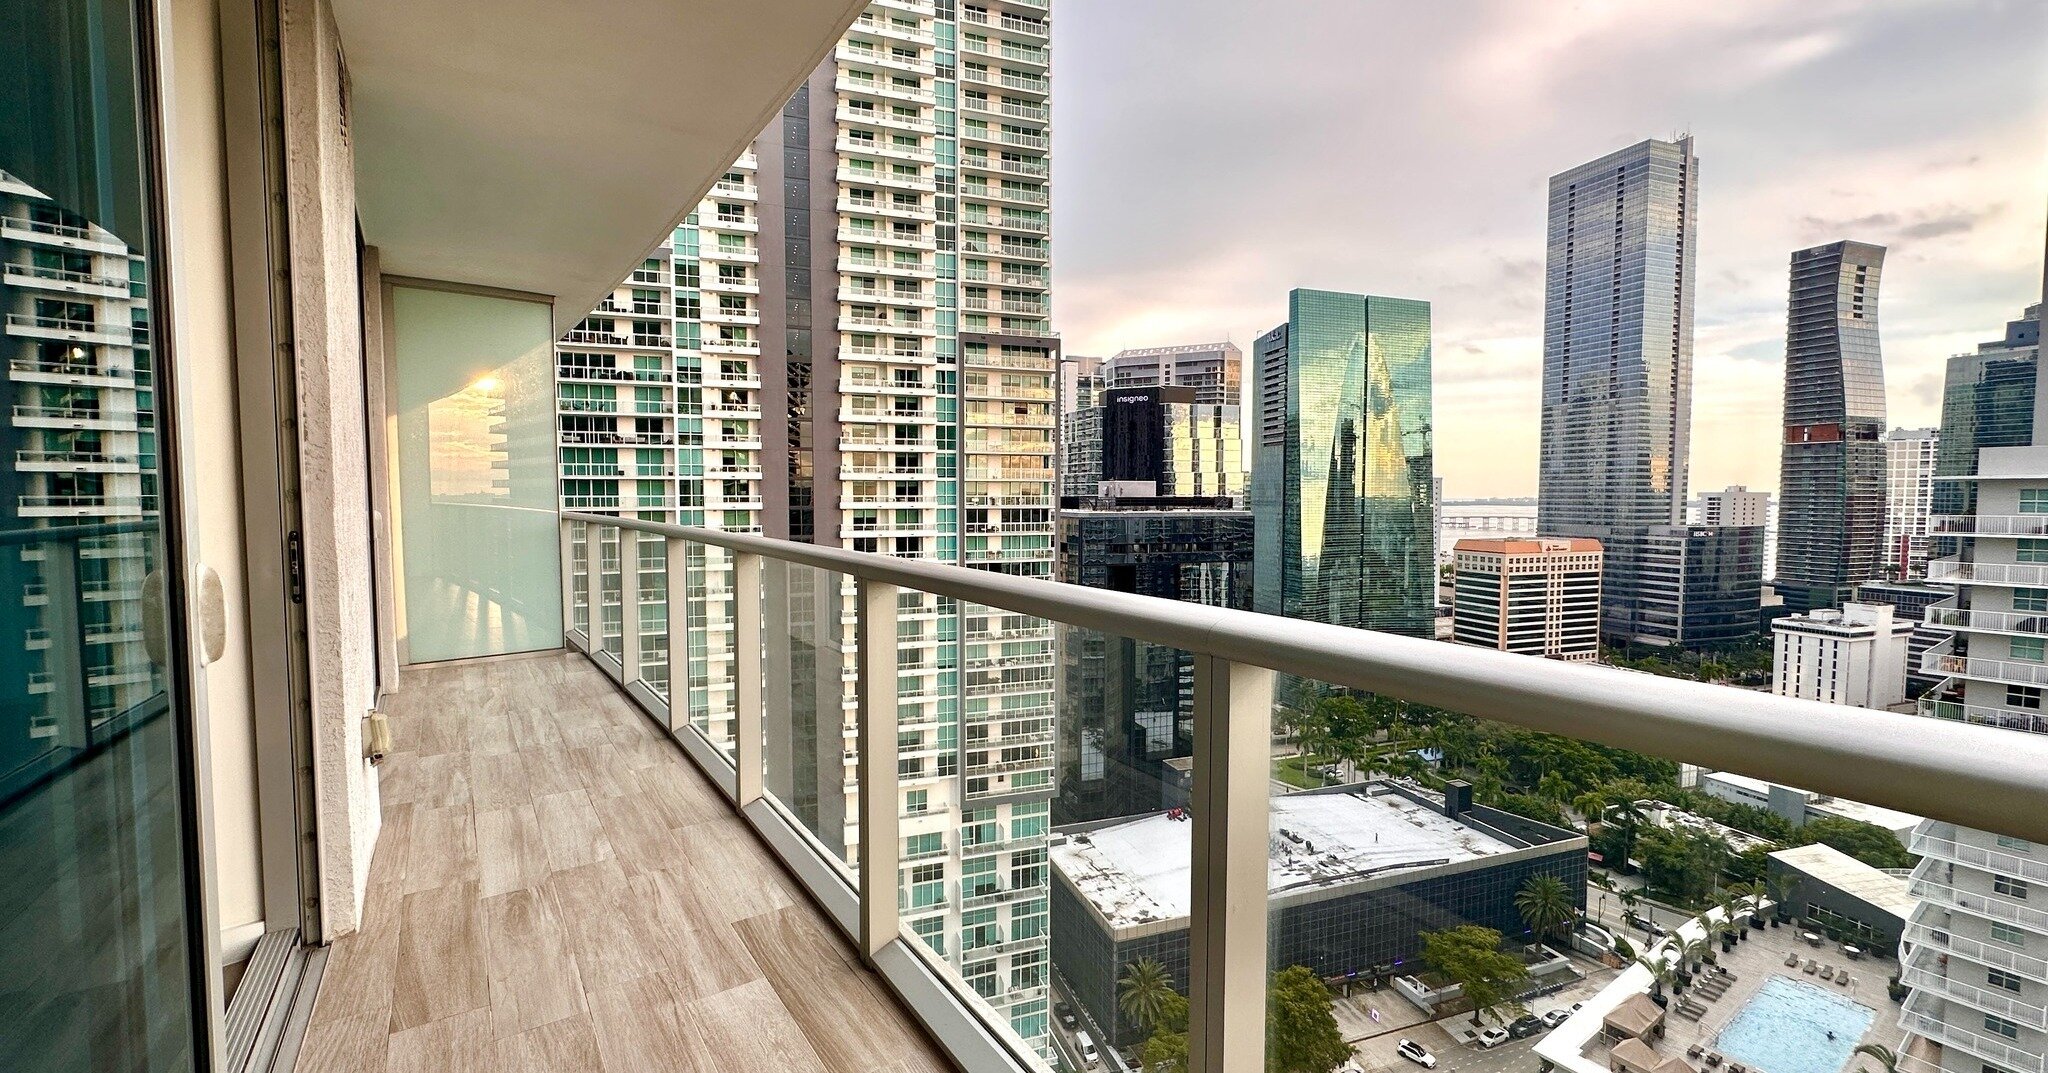 Rented✅
1100 S Miami Ave , Unit 2403
Miami, FL 33130
1 bed &bull; 1 bath &bull; 977 Sq Ft

Beautiful 1 bedroom + den, 1 bath unit in Brickell at Millecento created by Carlos Ott and designed by Pinifarina. White tiles throughout the unit. High rise b